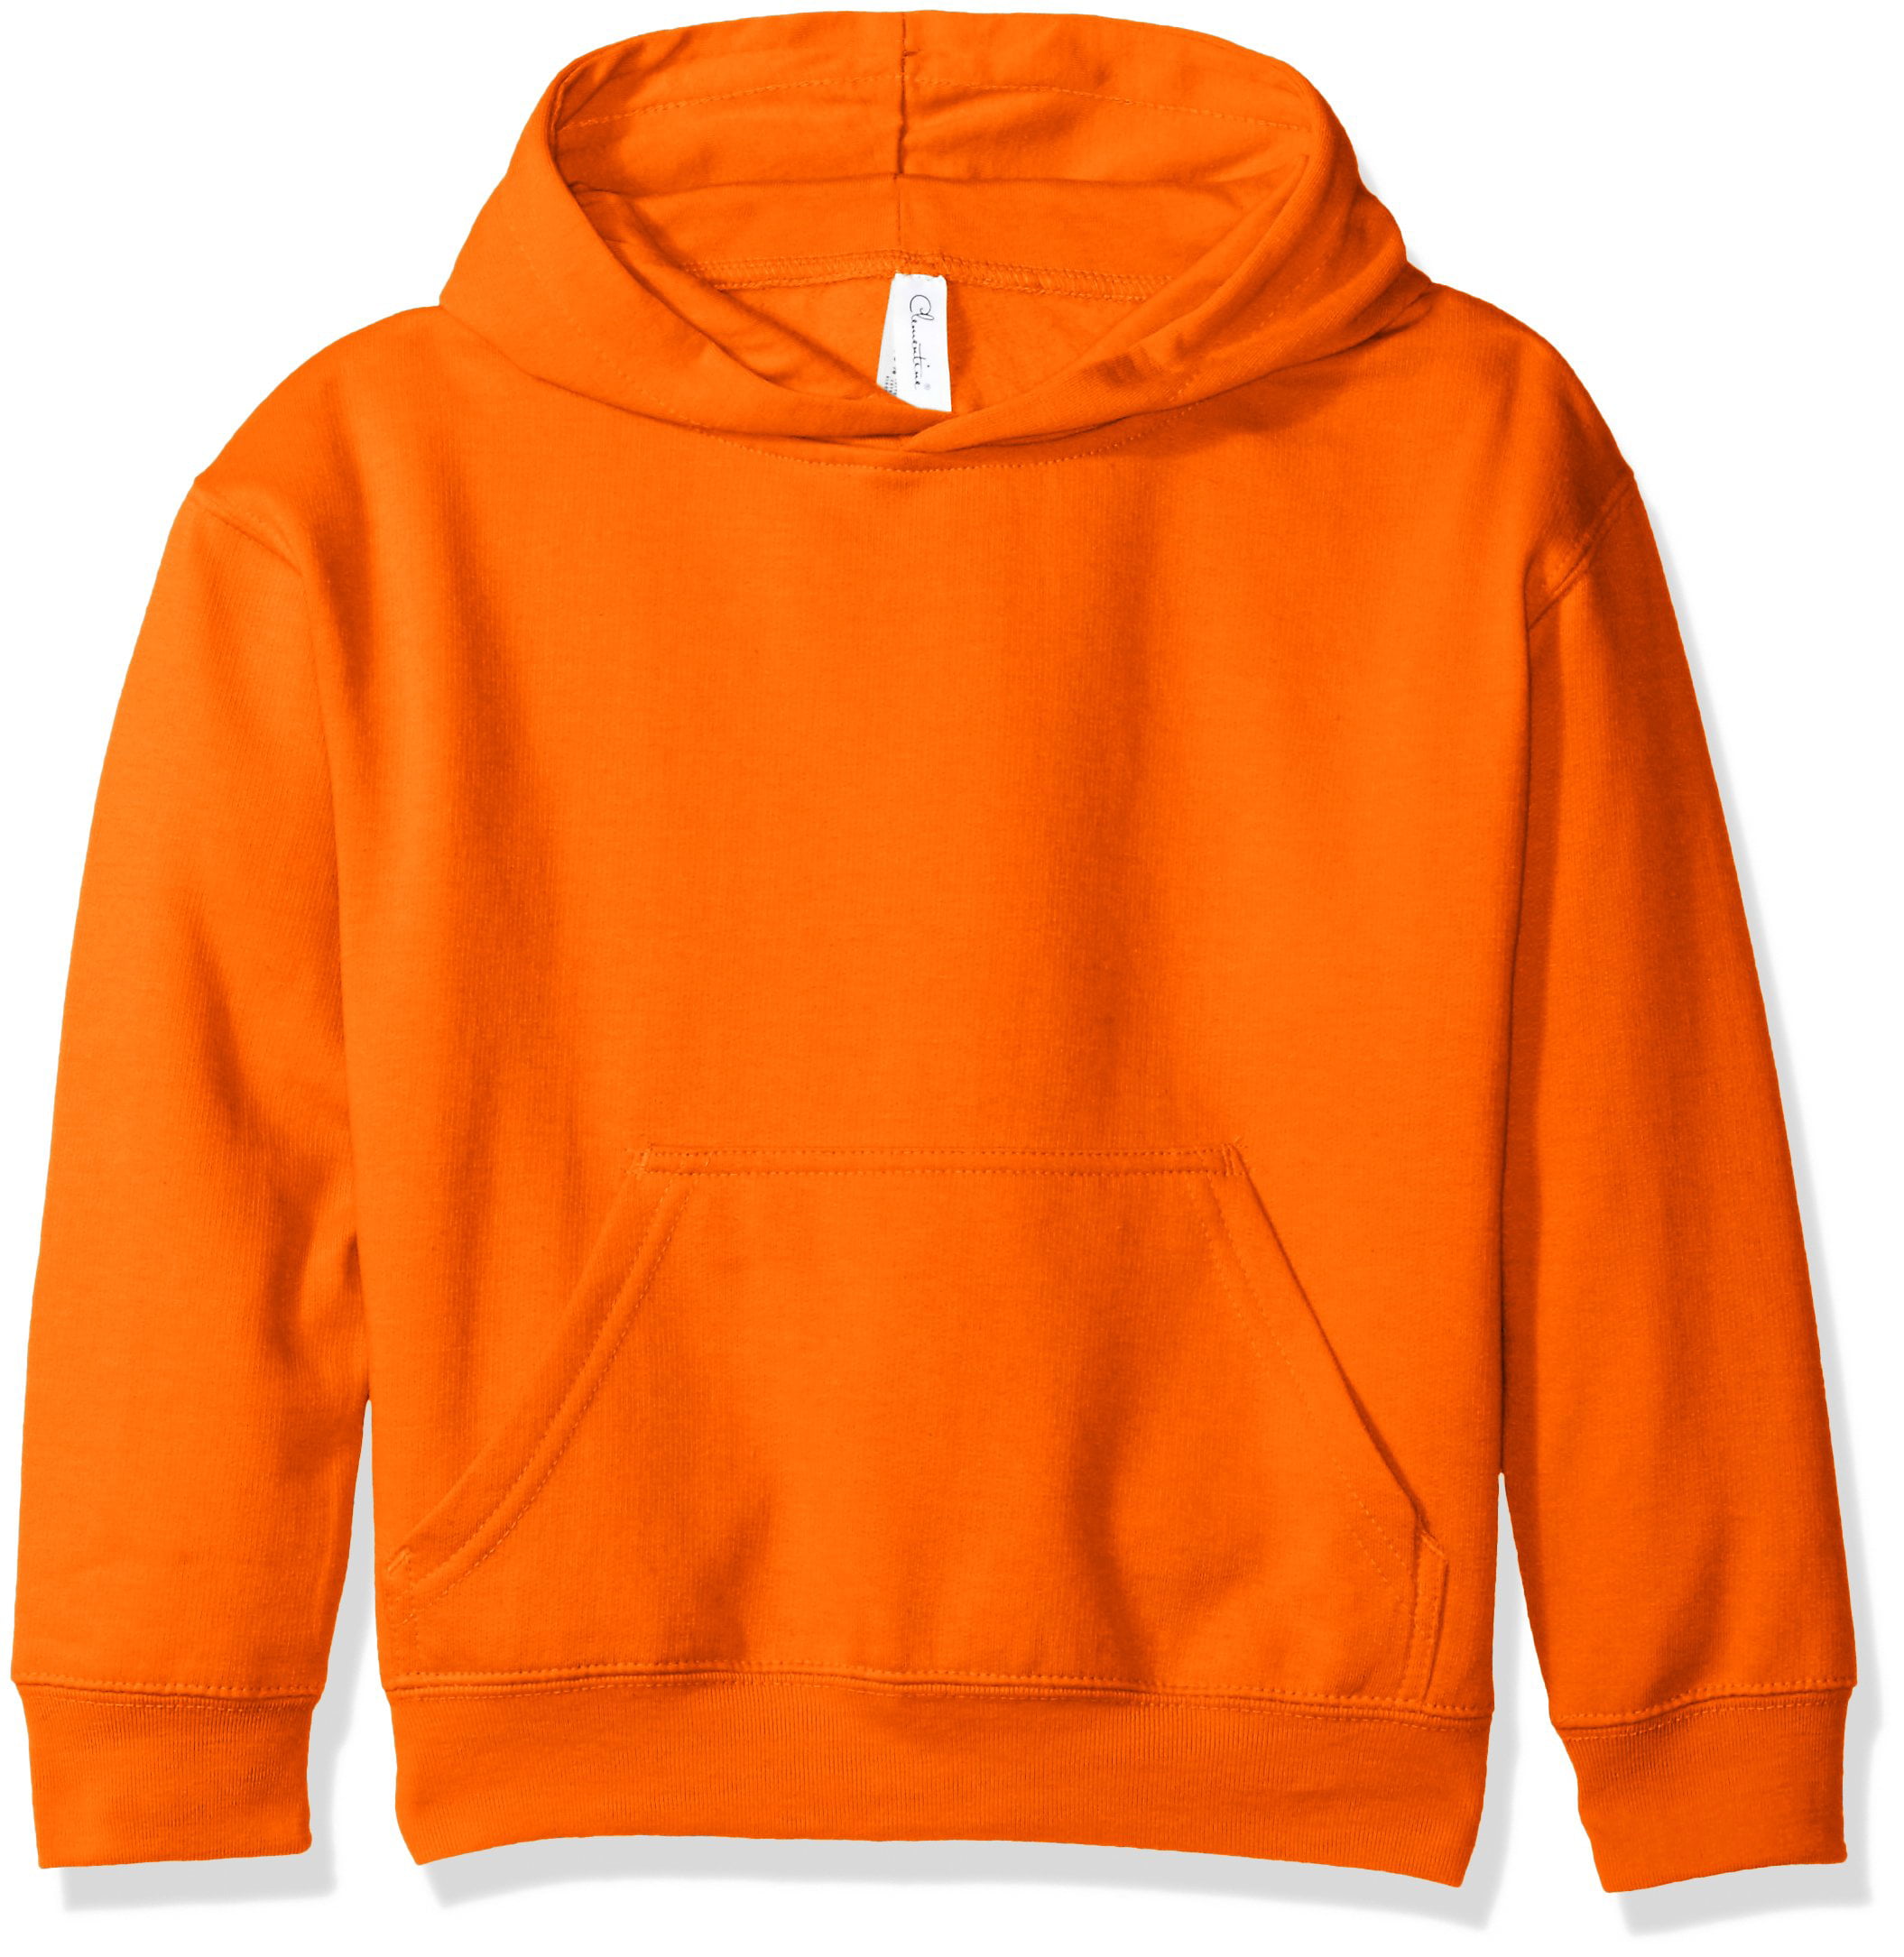 Apparel Youth Hooded Pullover Sweatshirt with Pouch Pocket Clementine Girls Big 7-16